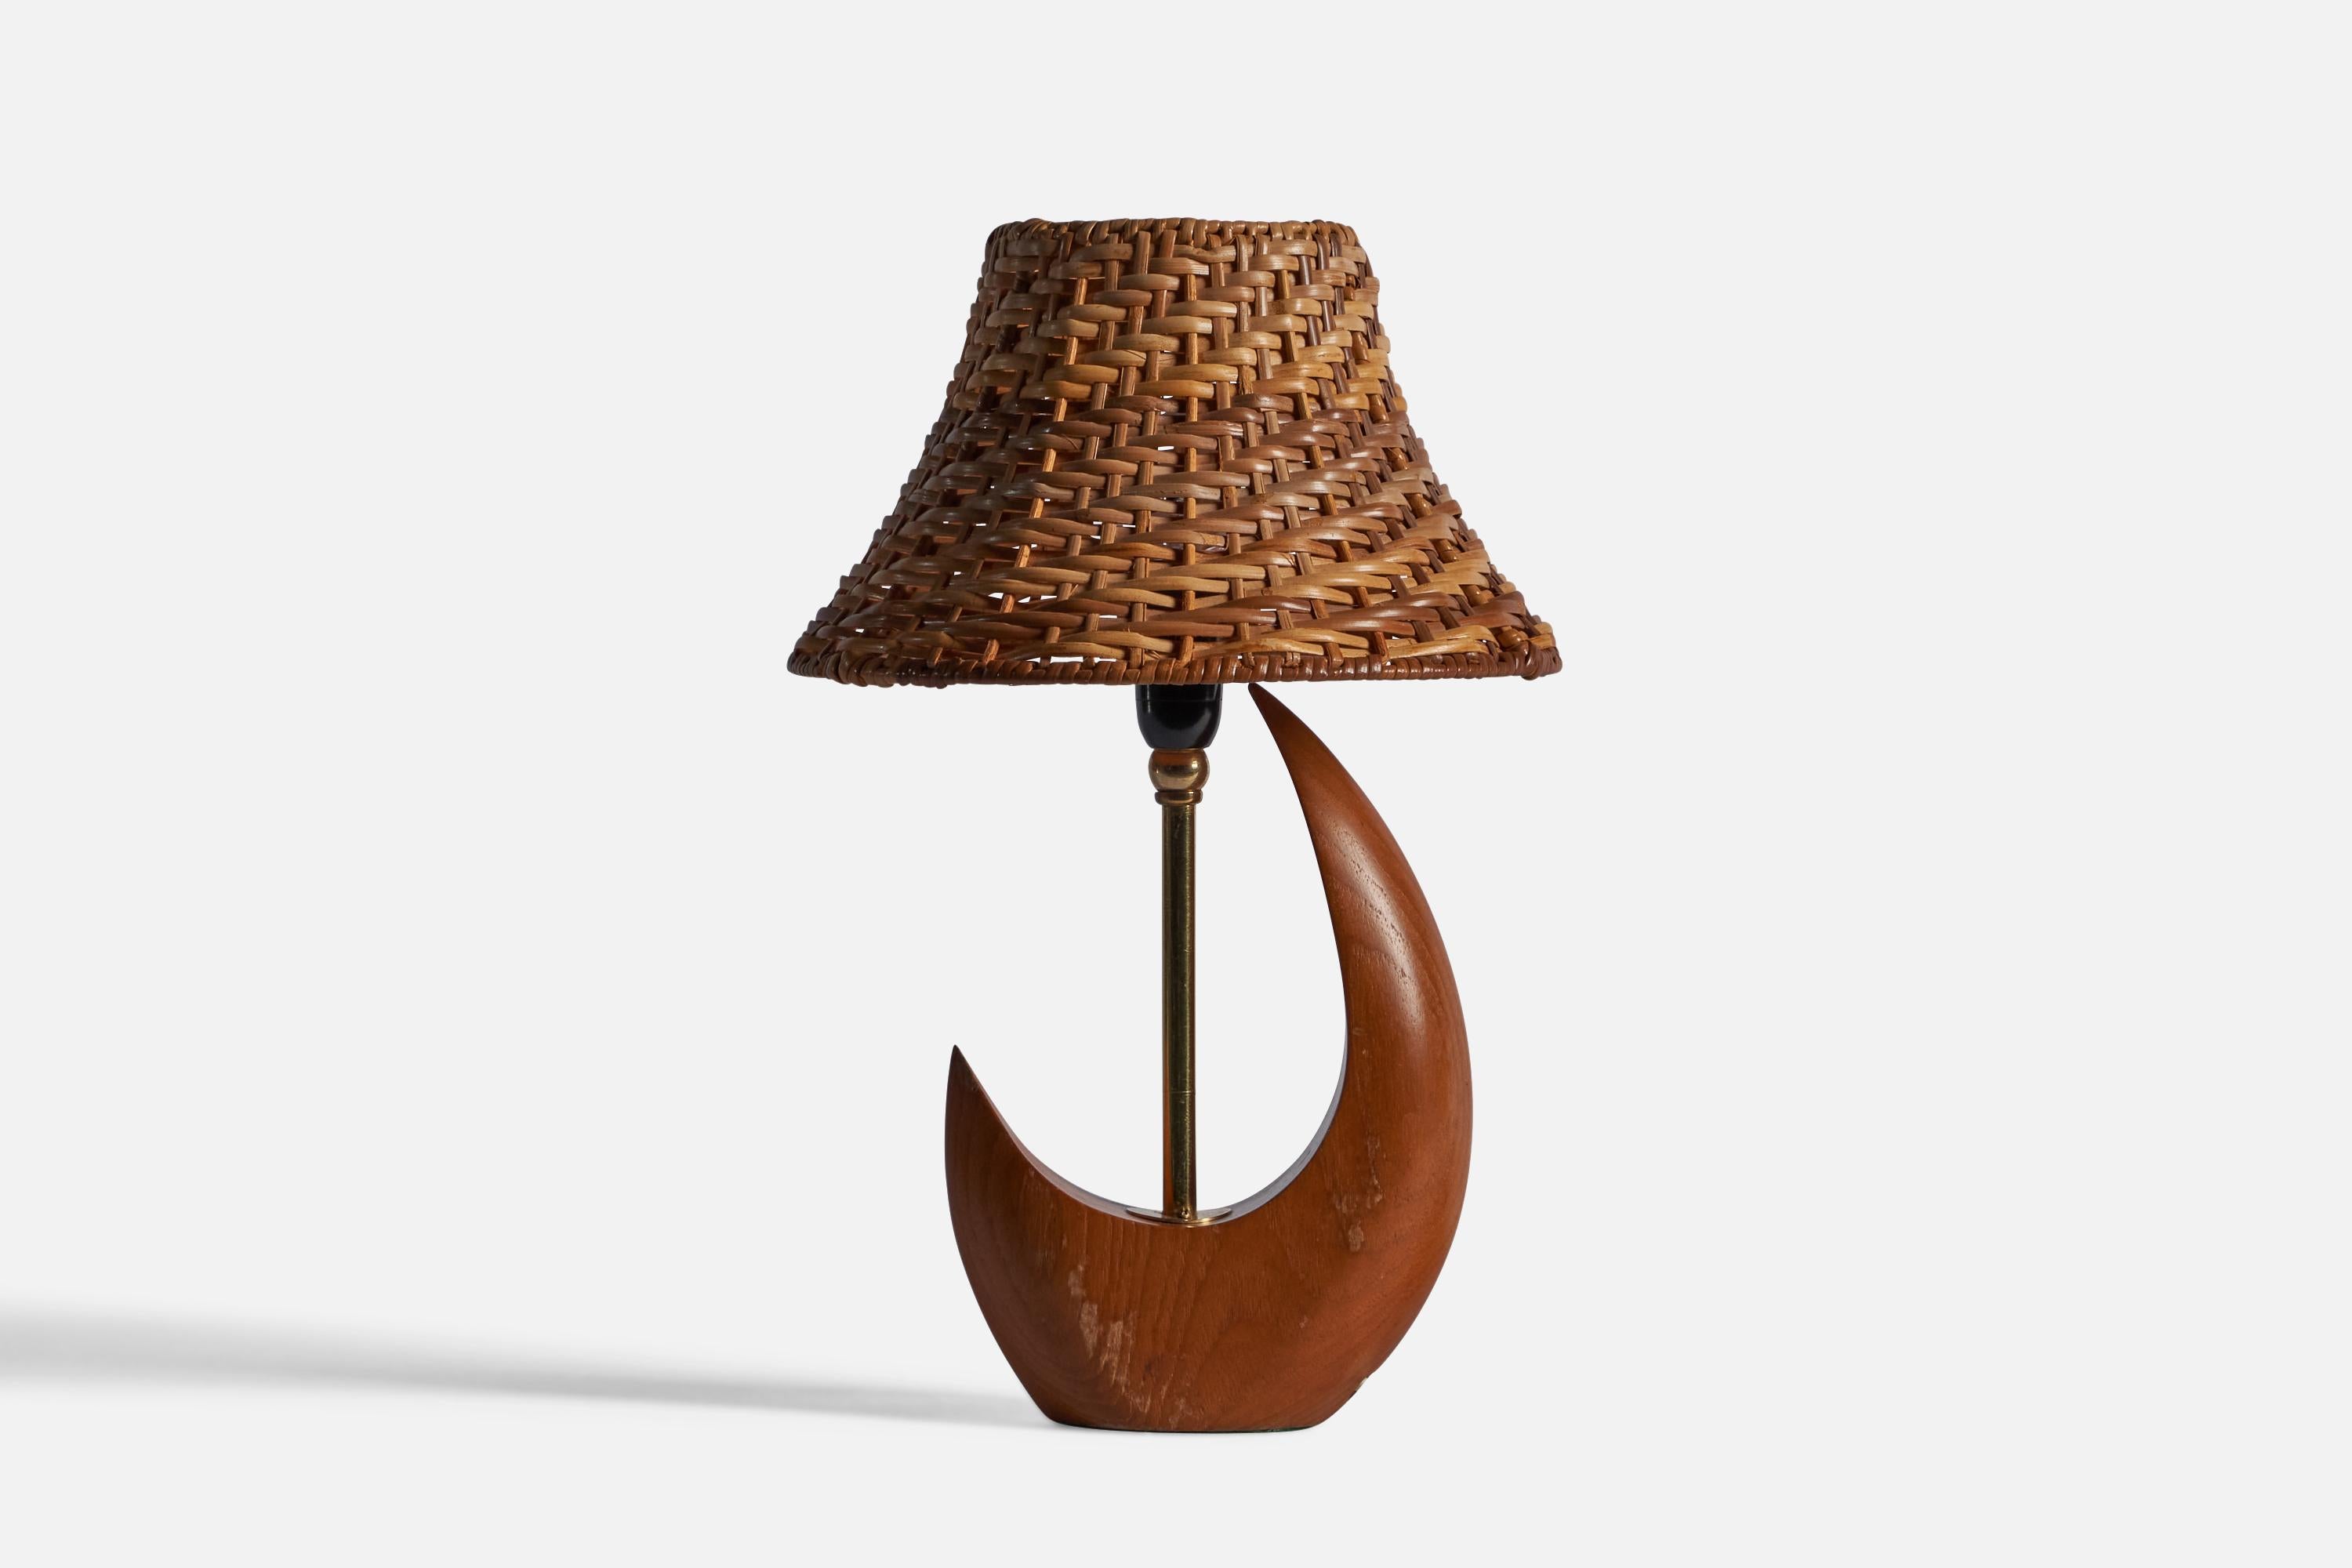 A teak, brass, and rattan table lamp, designed and produced in Sweden, c. 1950s.

Overall Dimensions: 13.75